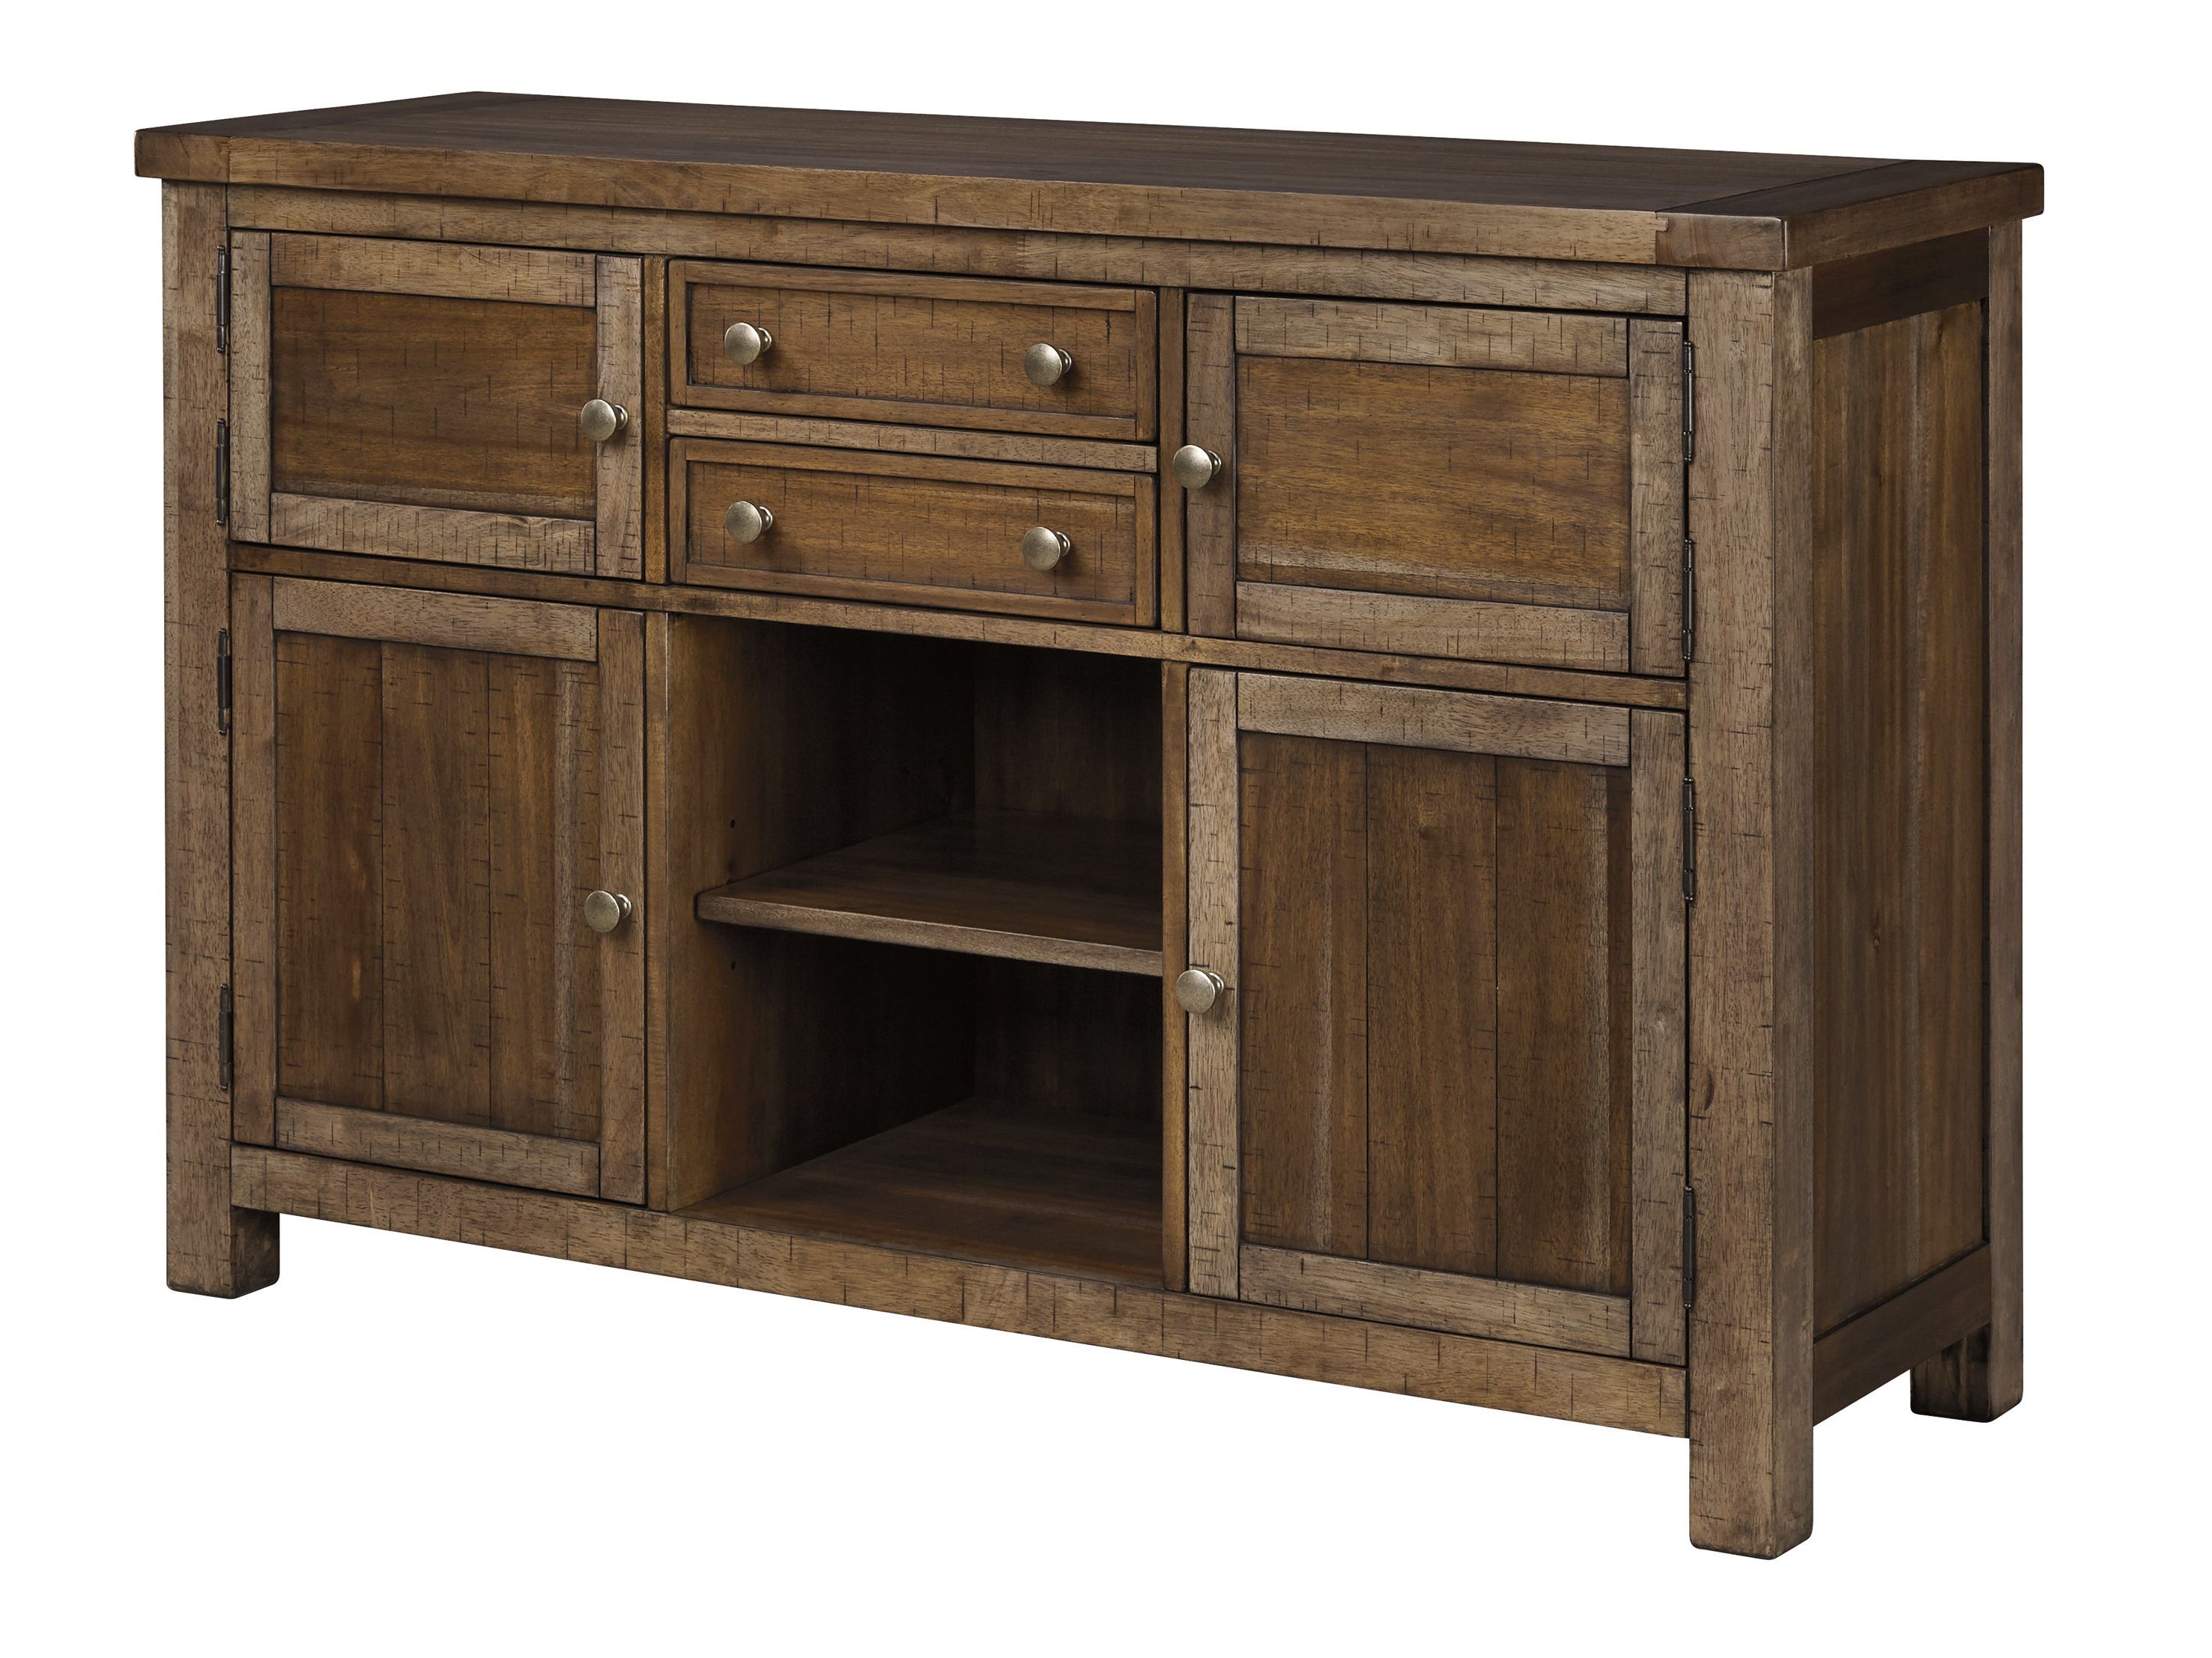 Hillary Dining Room Buffet Table Within Whitten Sideboards (Gallery 6 of 20)